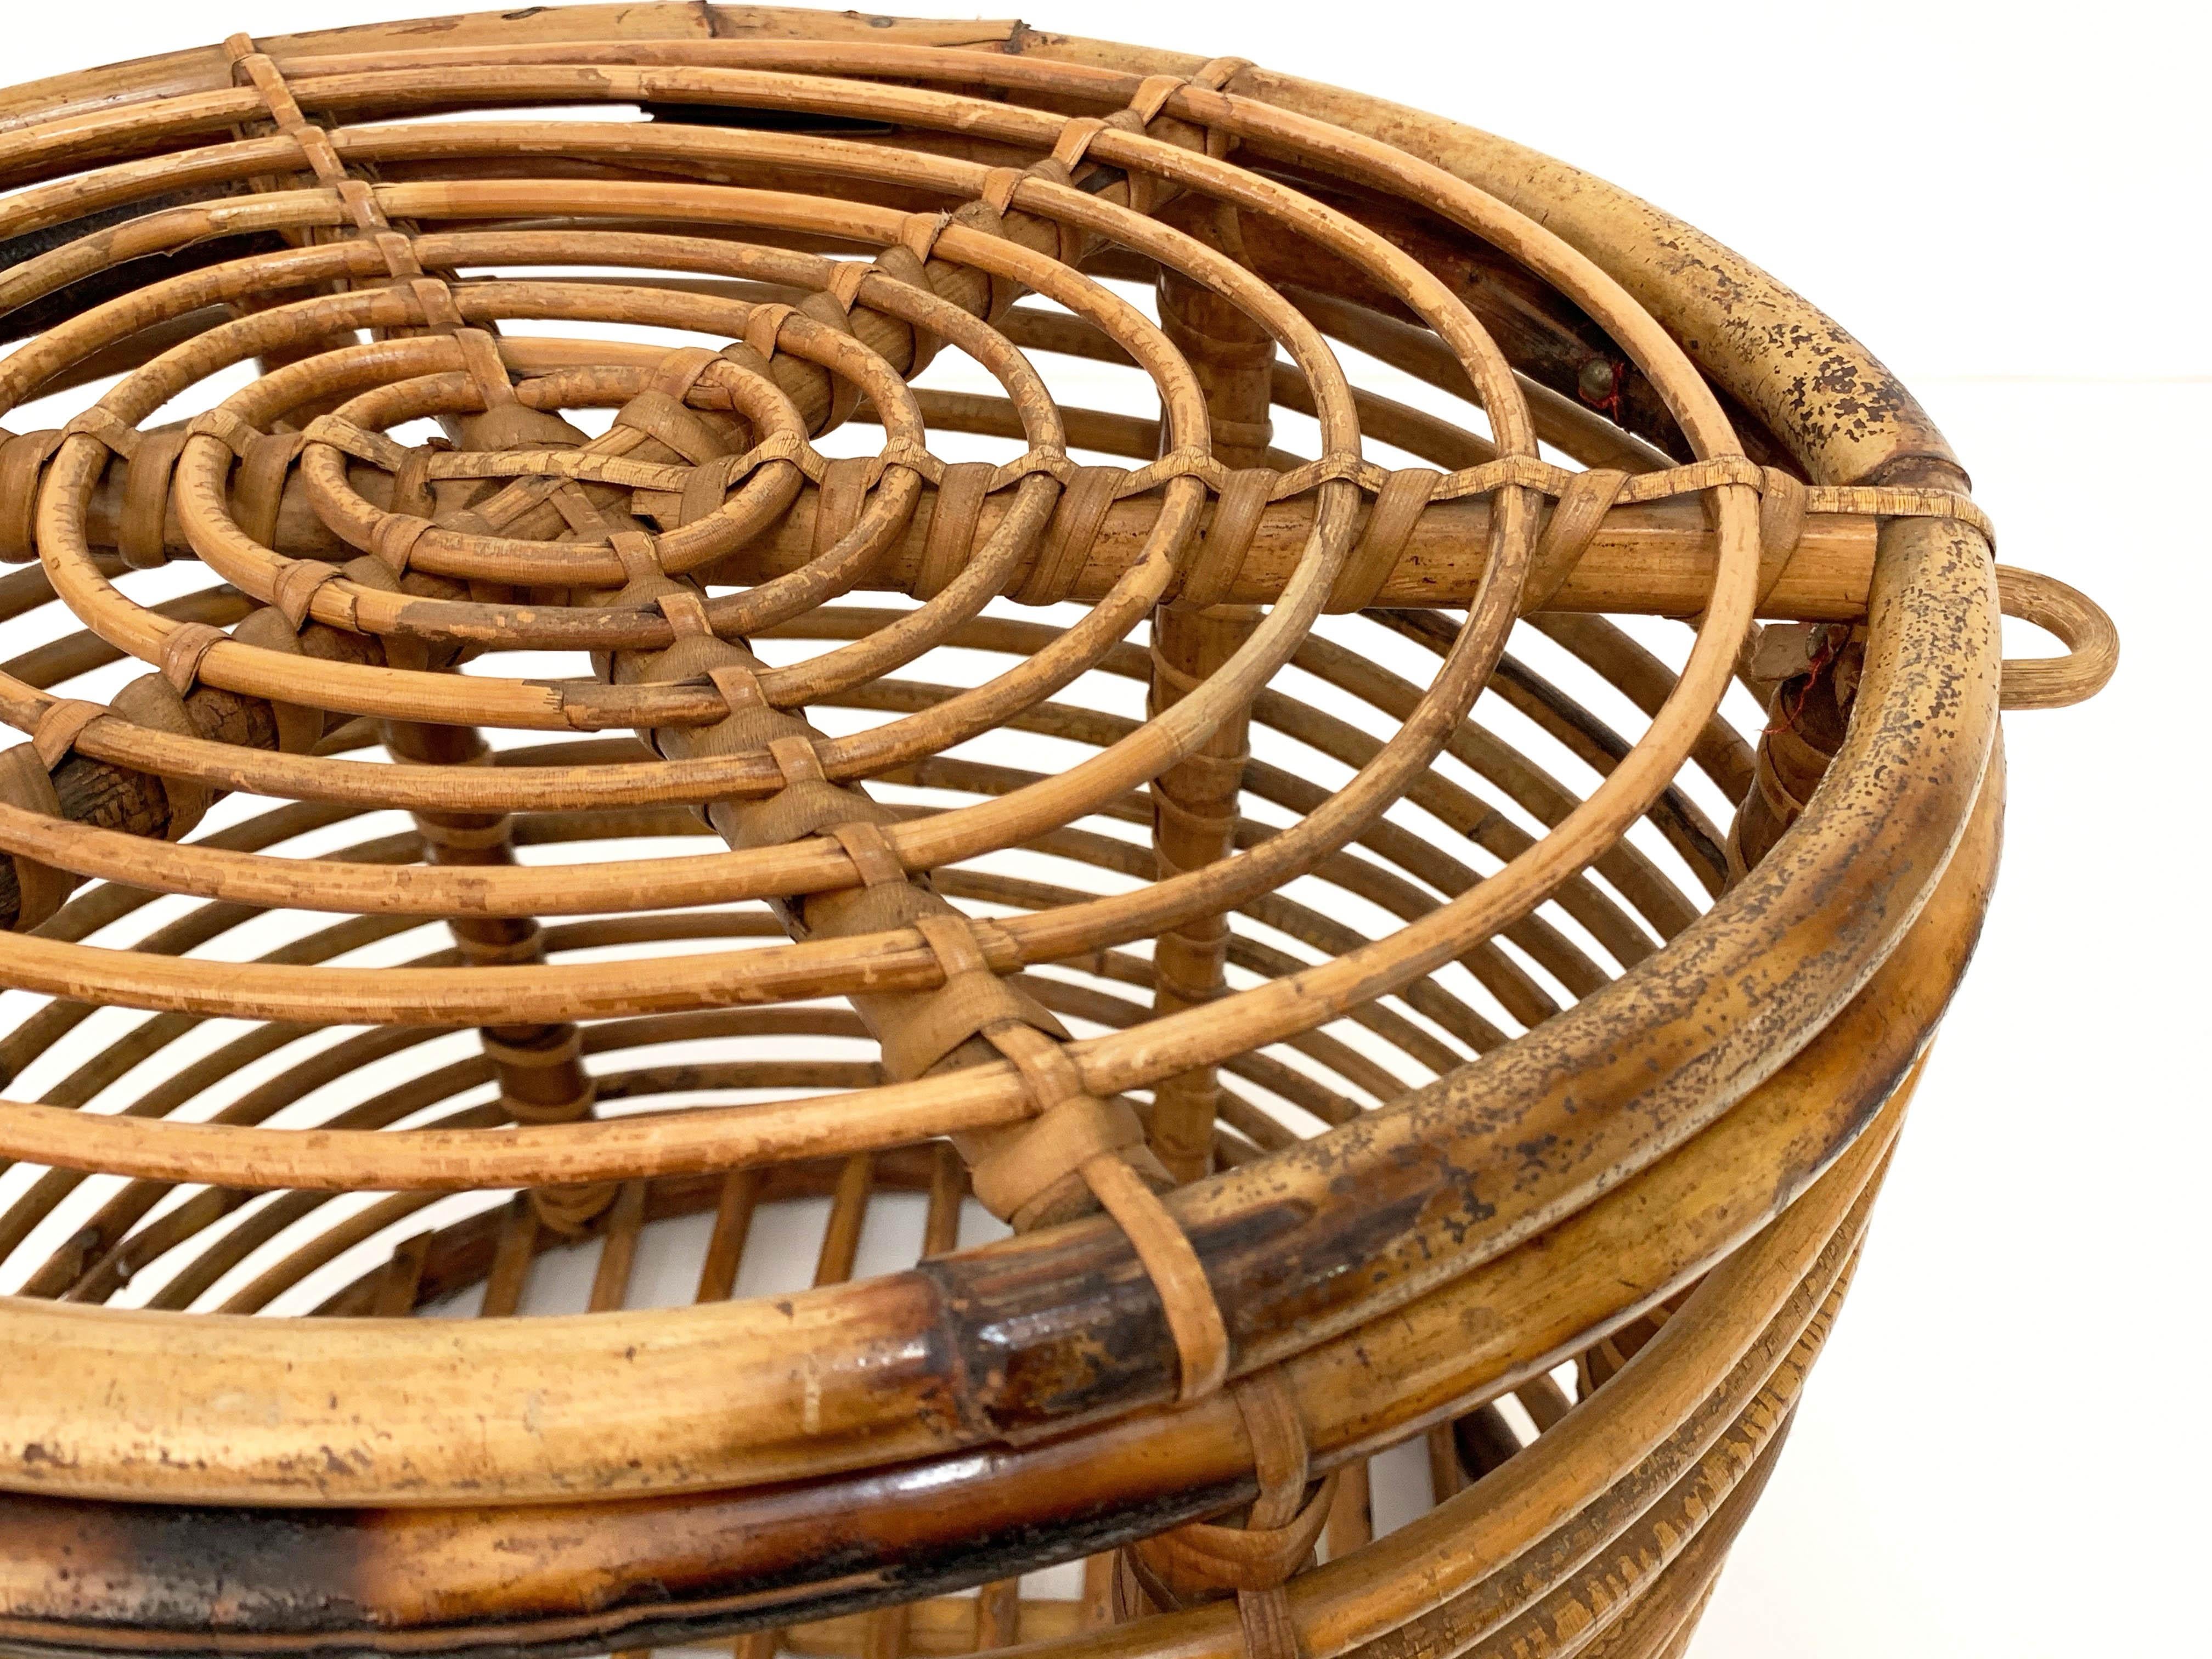 Midcentury French Riviera Bamboo and Rattan Oval Italian Basket, 1950s For Sale 9